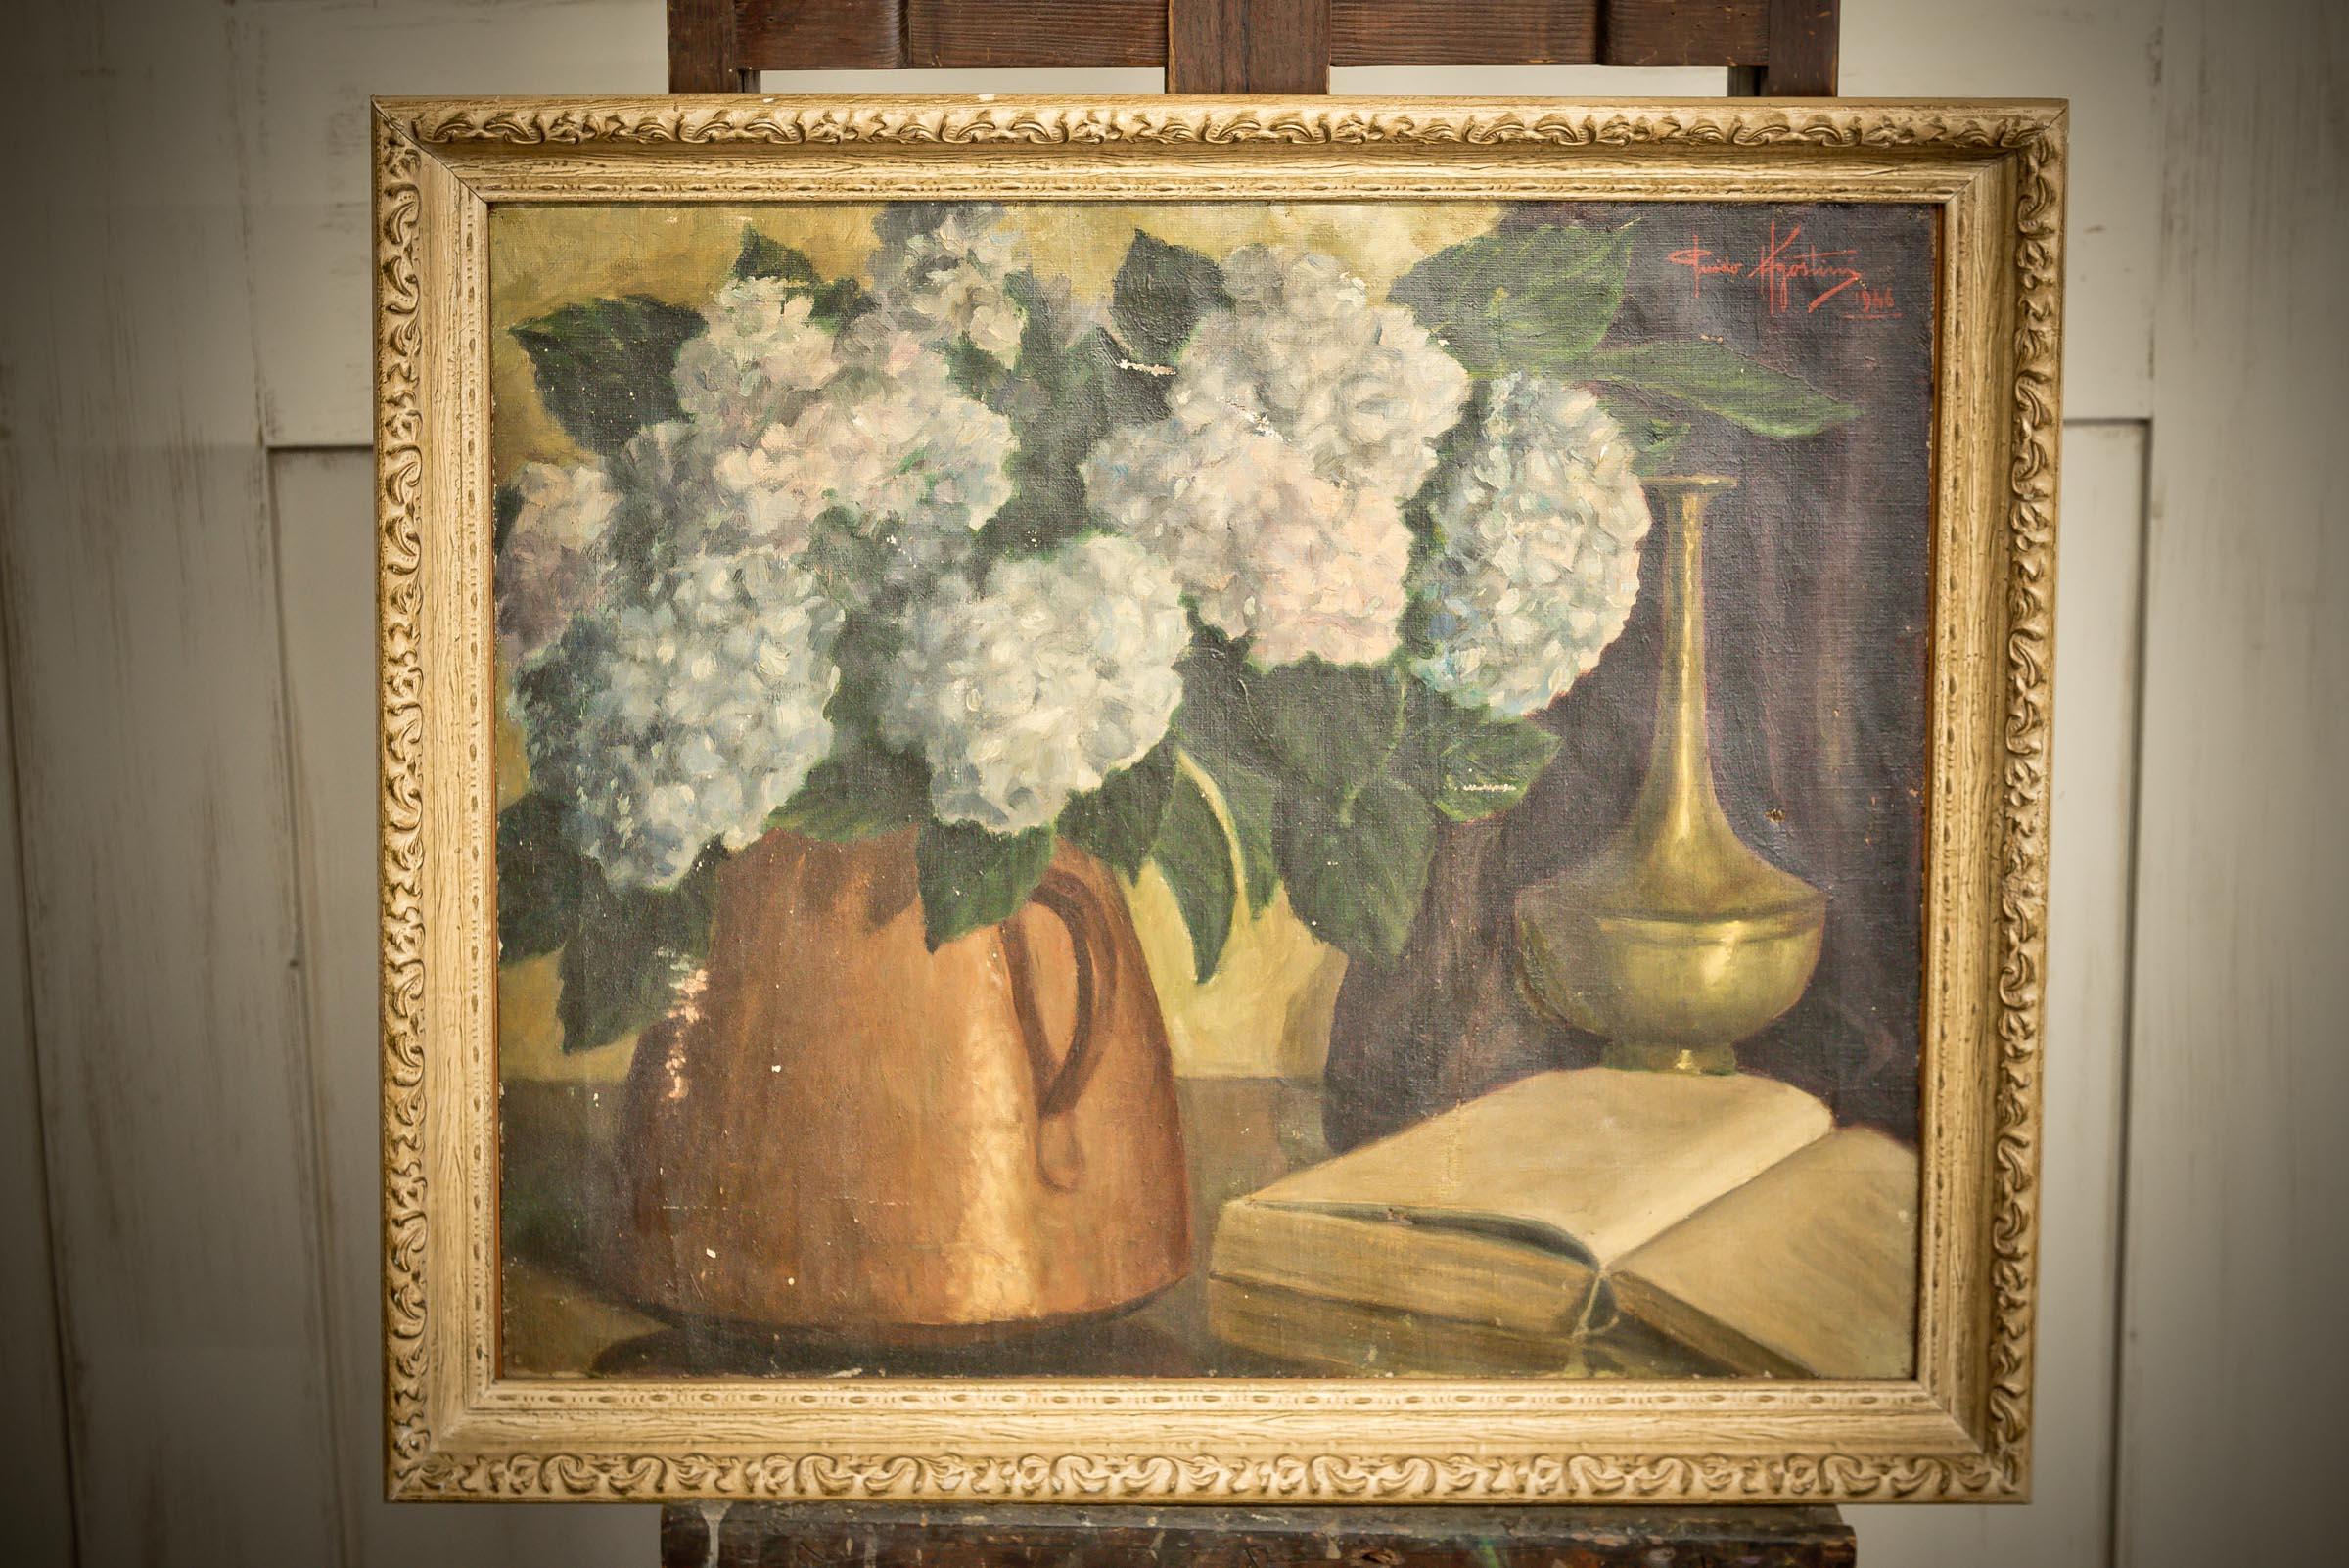 Beautiful oil painting from 1946 signed by an italian artist Guido Agostini framed in a gold painted wooden frame.